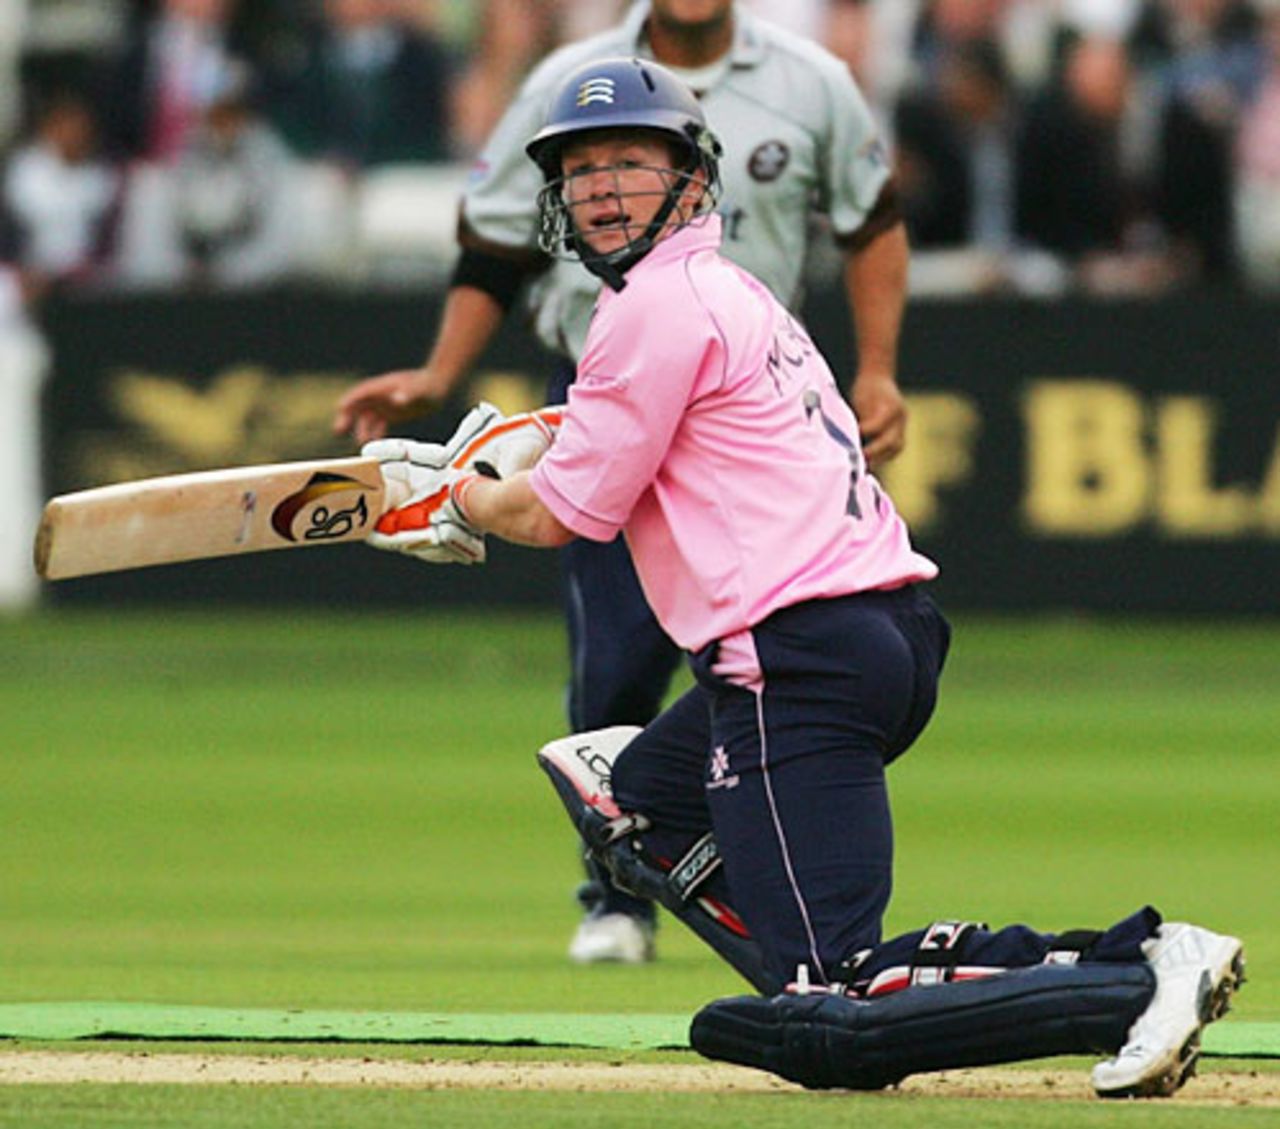 Eoin Morgan reverse sweeps against Surrey, Surrey v Middlesex, Twenty20 Cup, Lord's, July 3, 2008